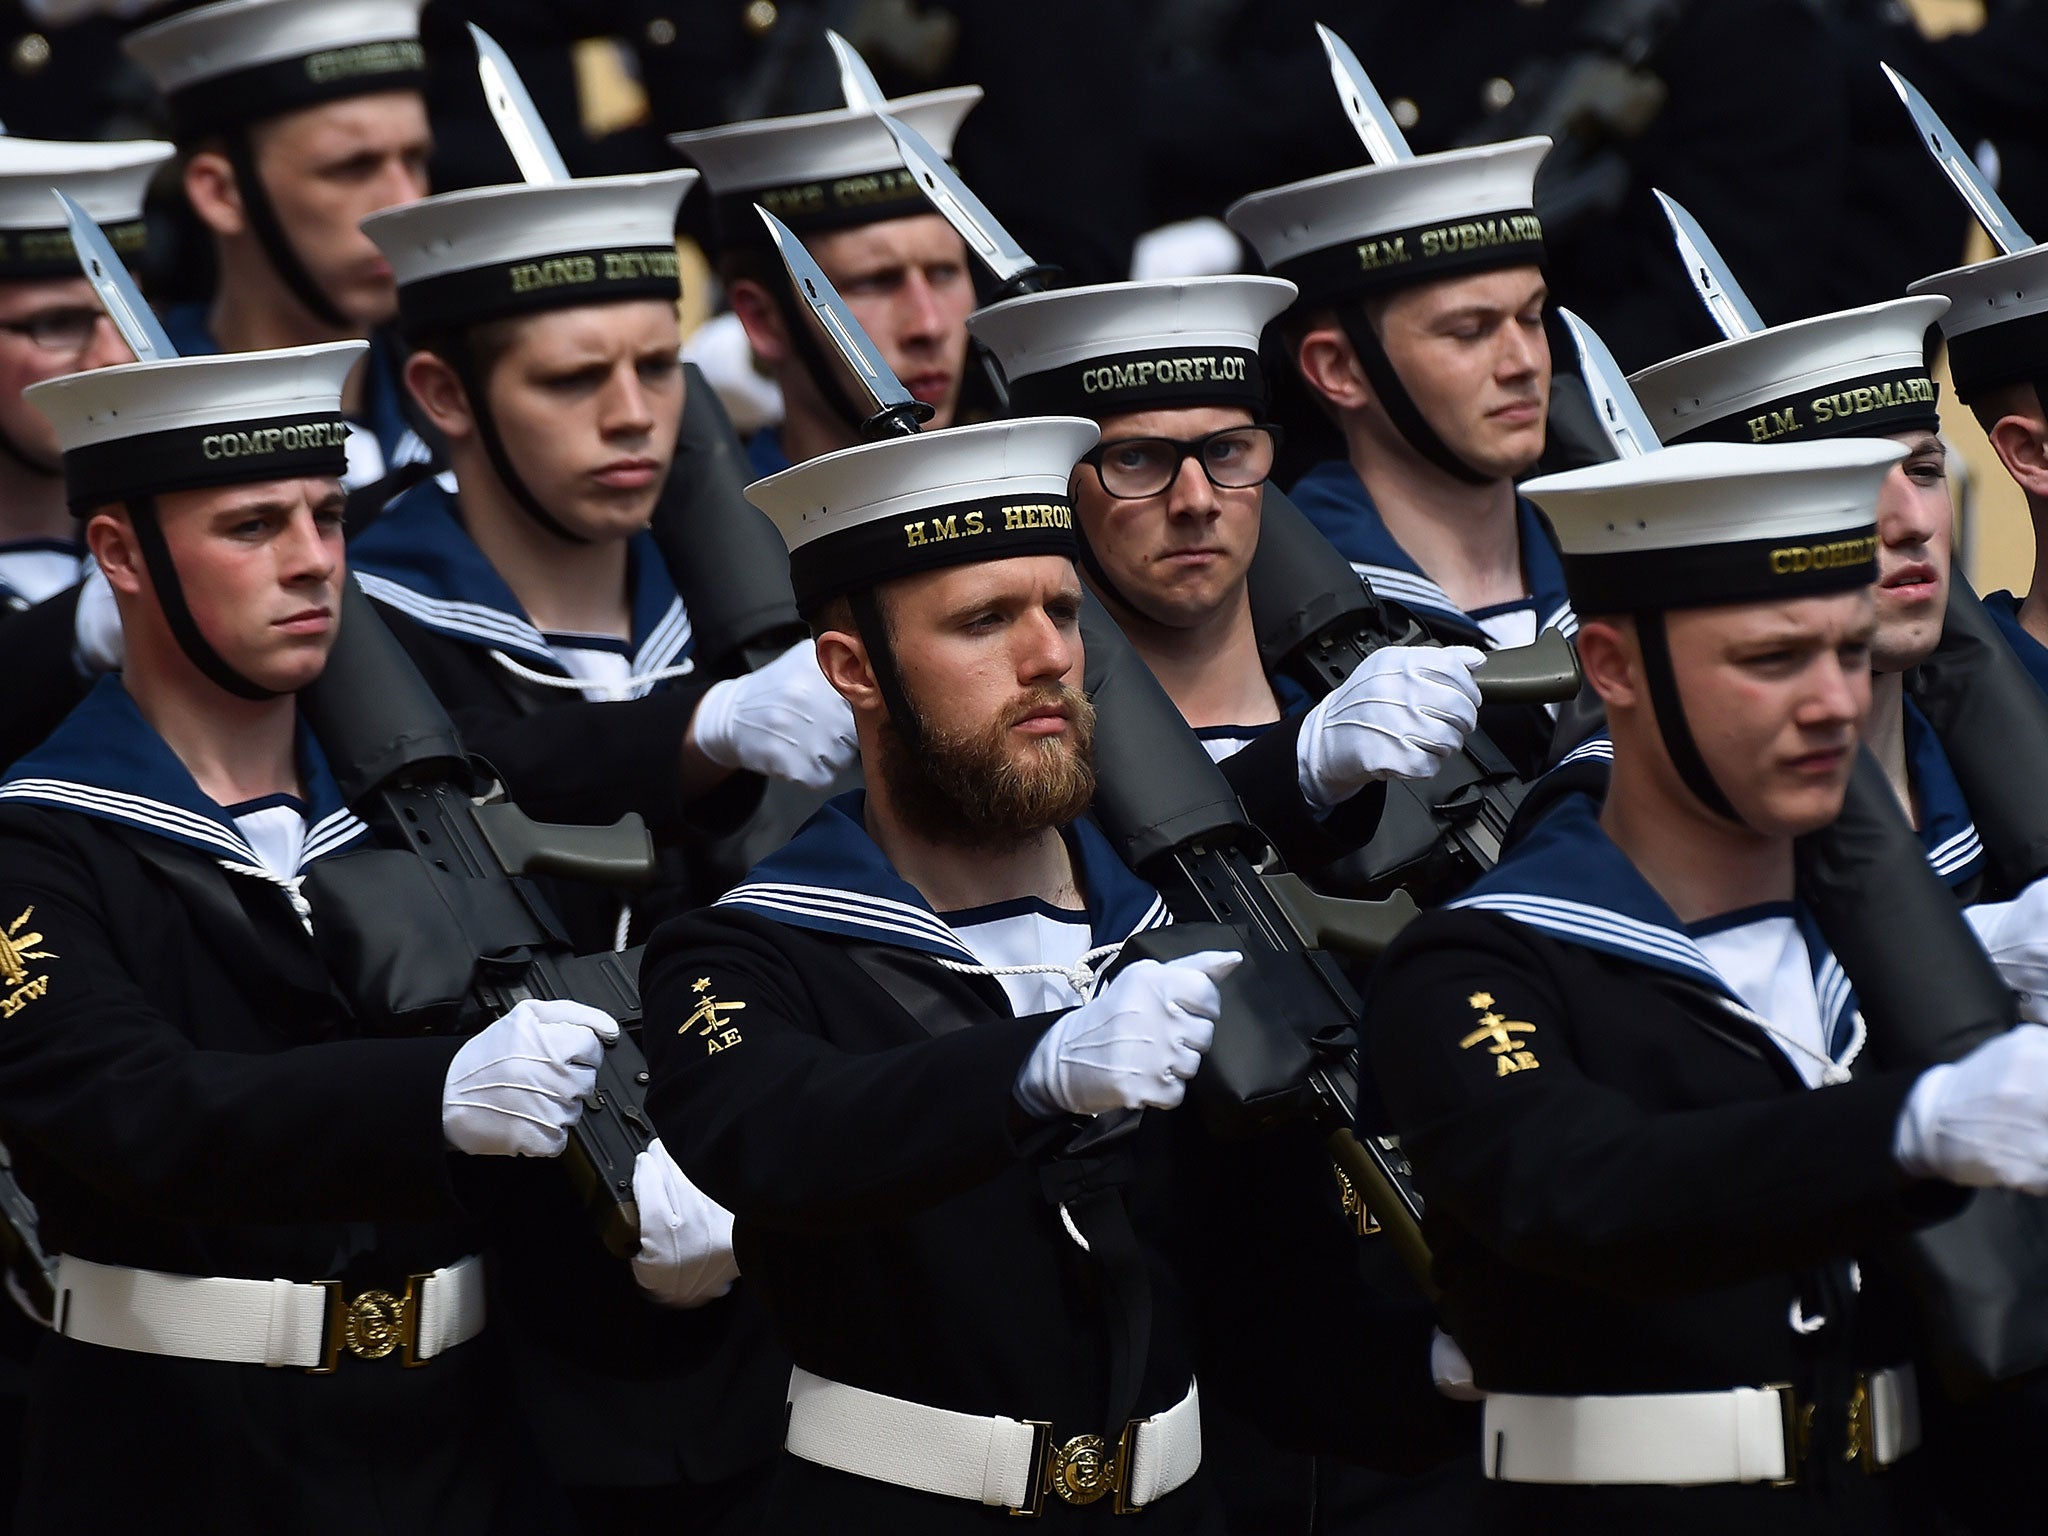 The Armed Forces may undershoot their target of 20,000 job cuts by 2020